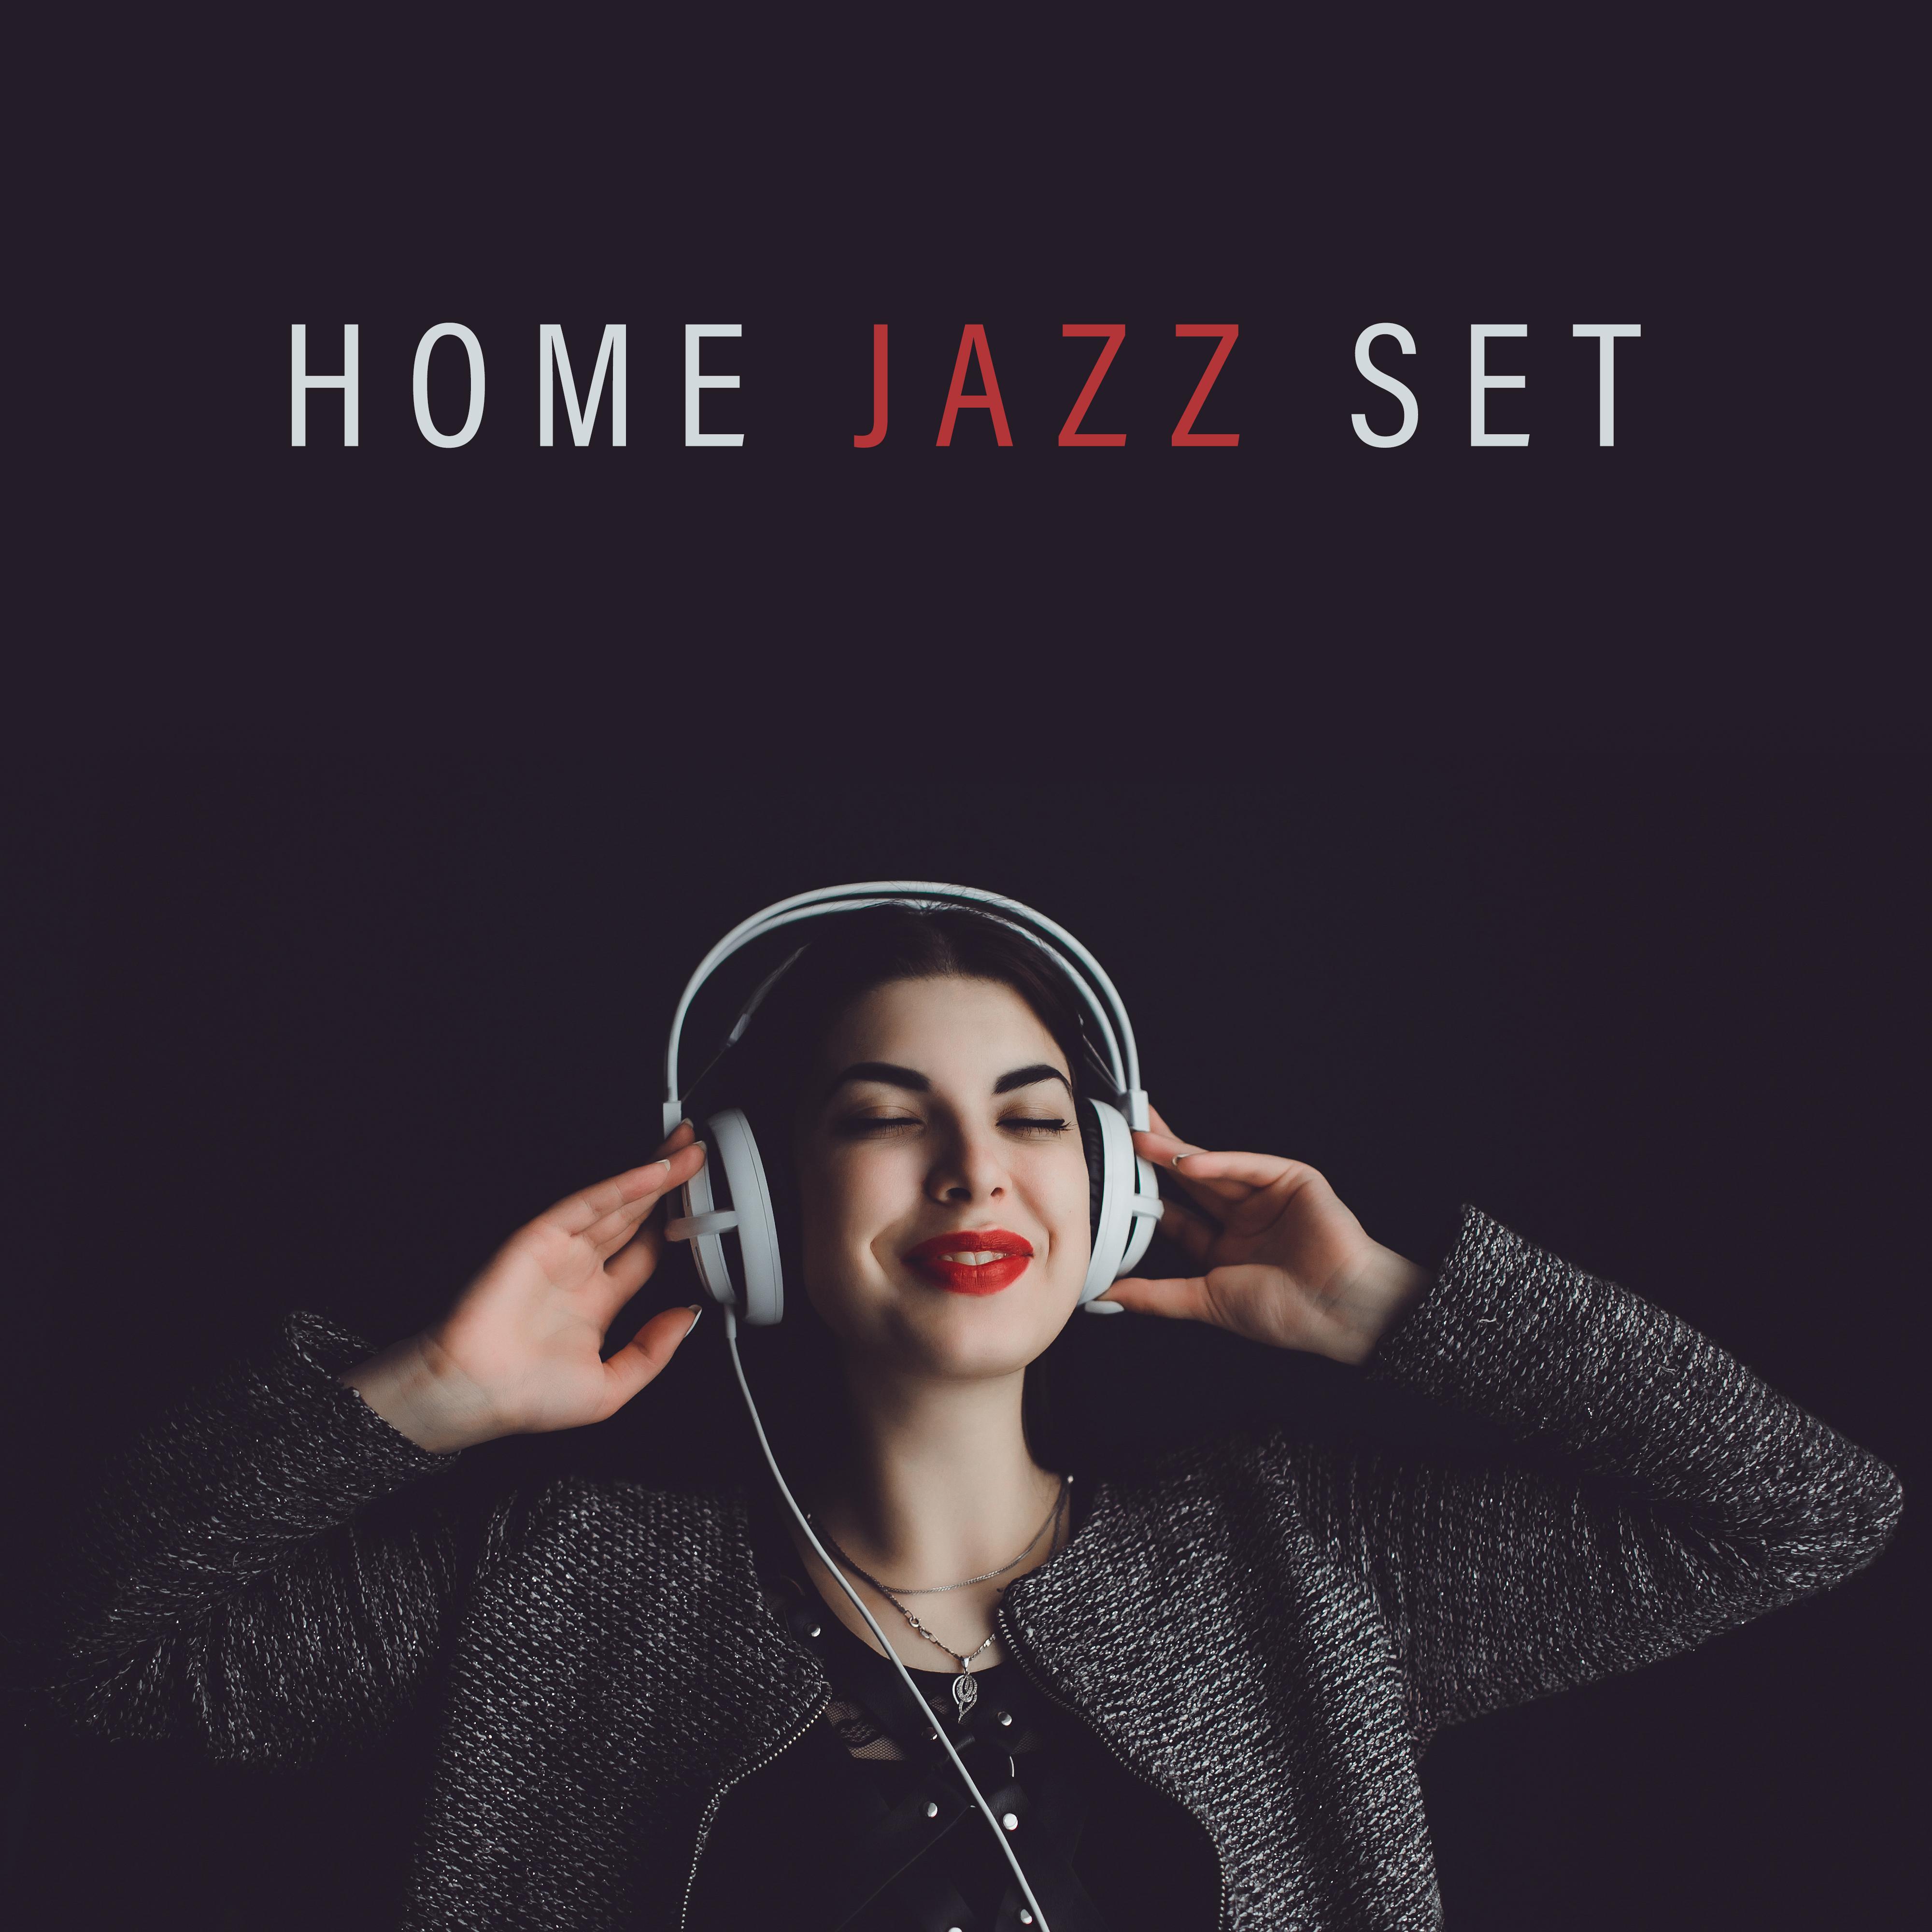 Home Jazz Set - Slow, Pleasant and Delicate Background Music for Your Home